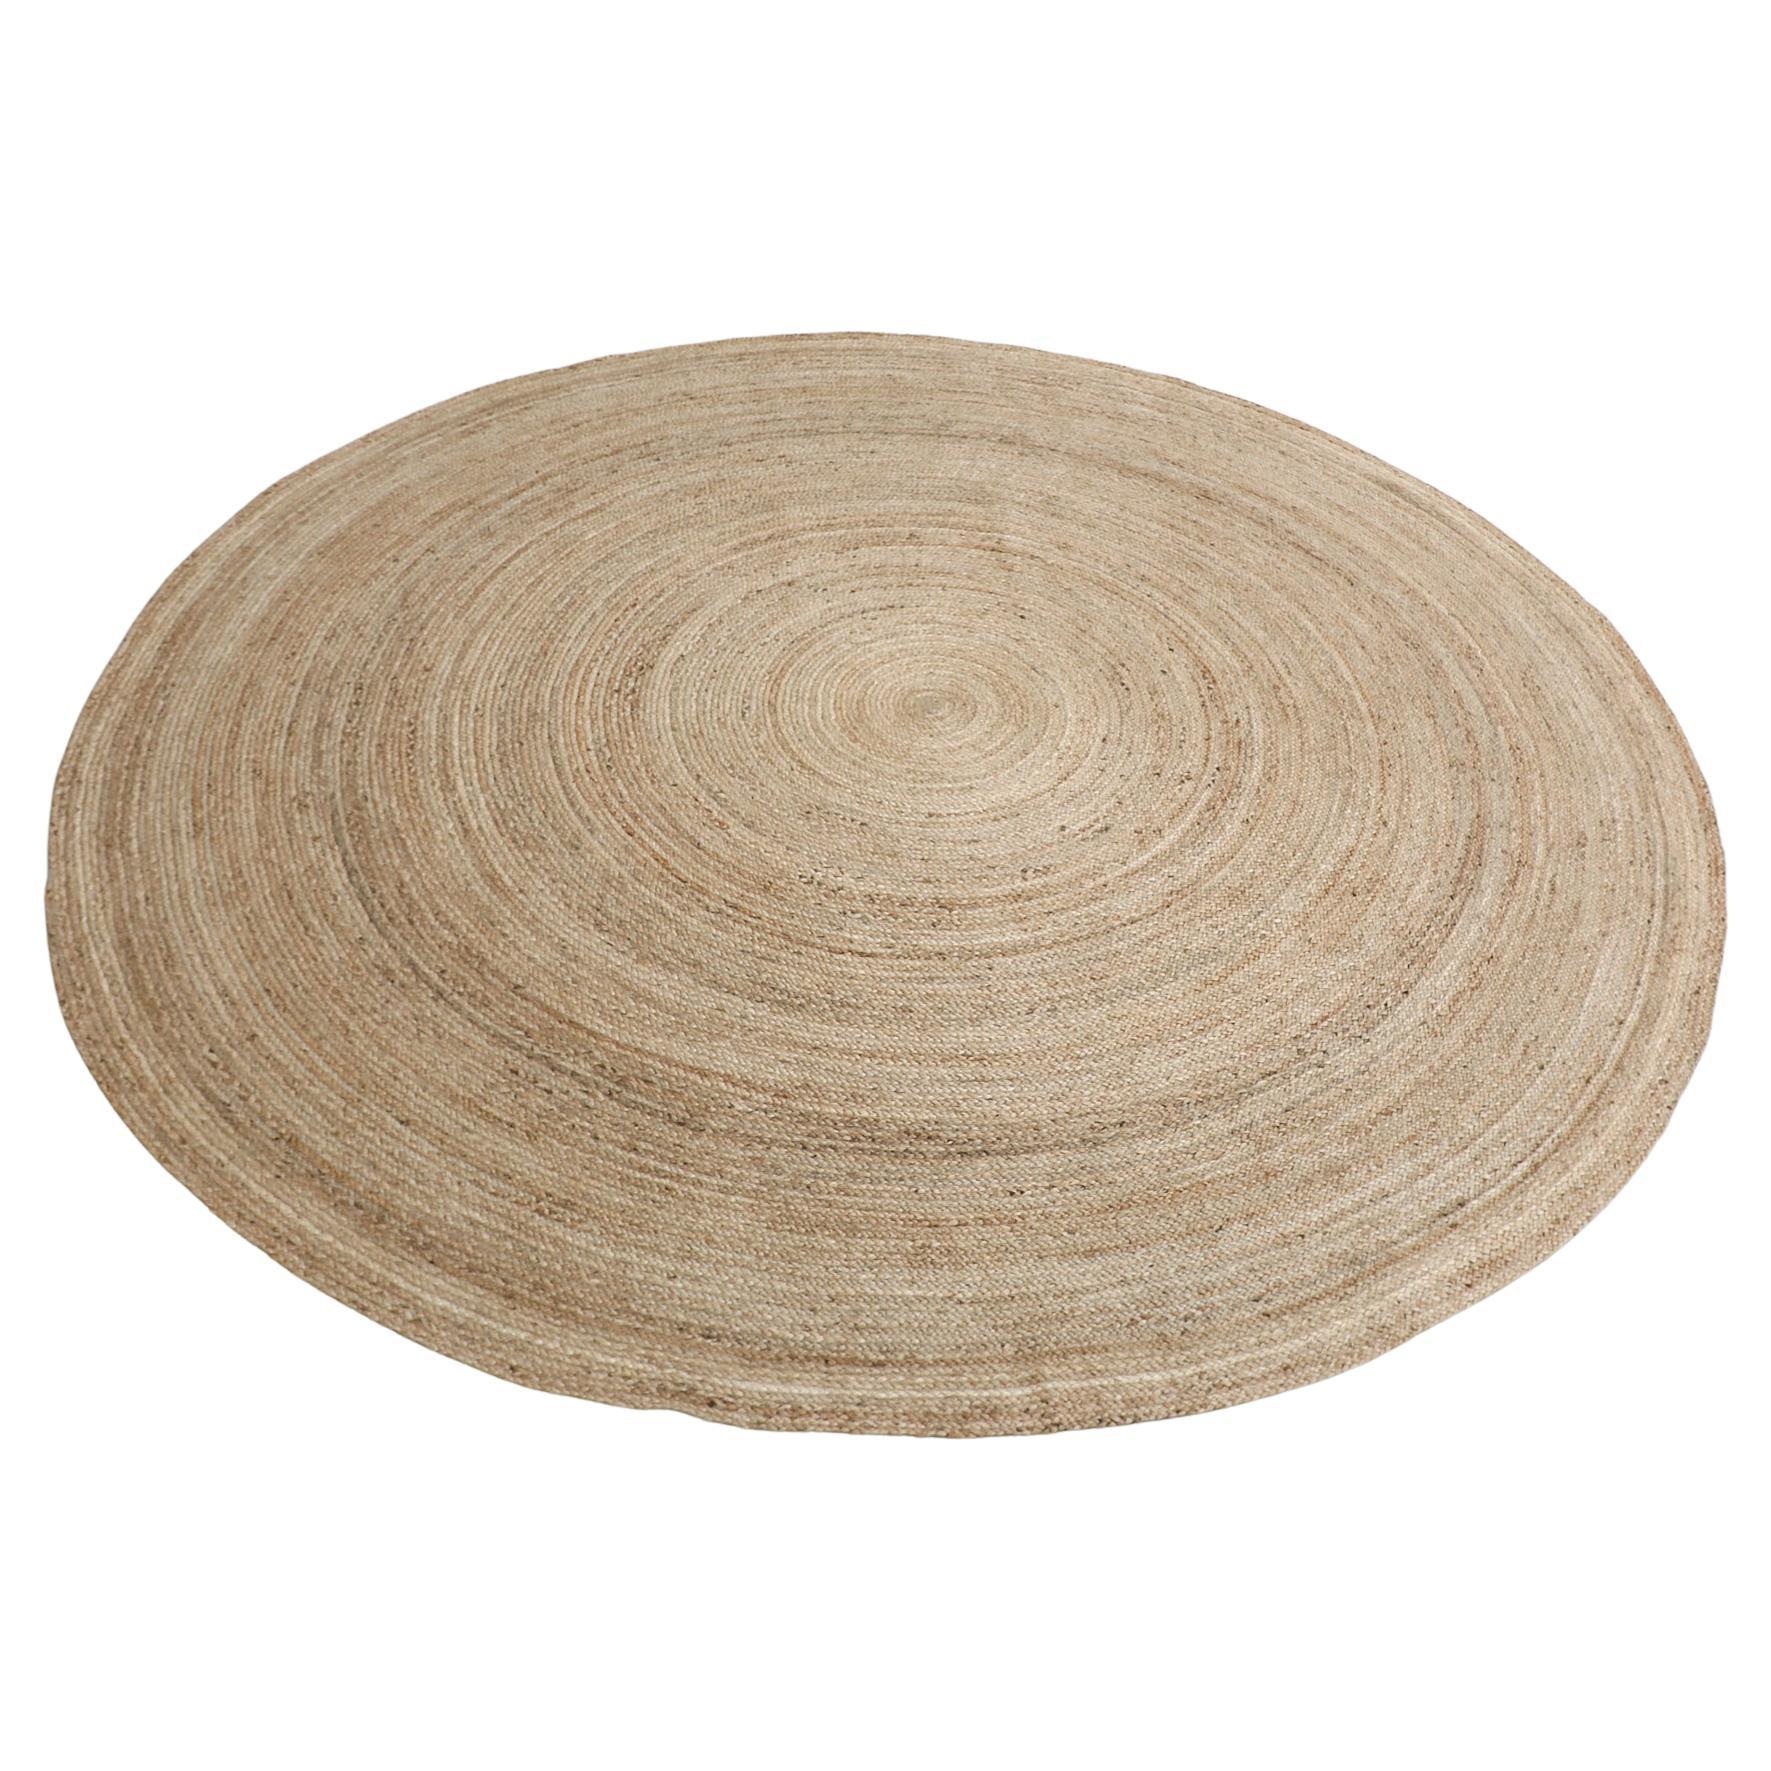 Hand braided 10ft Round Woven 'Montreal' Natural Sisal Rug, Made in India For Sale